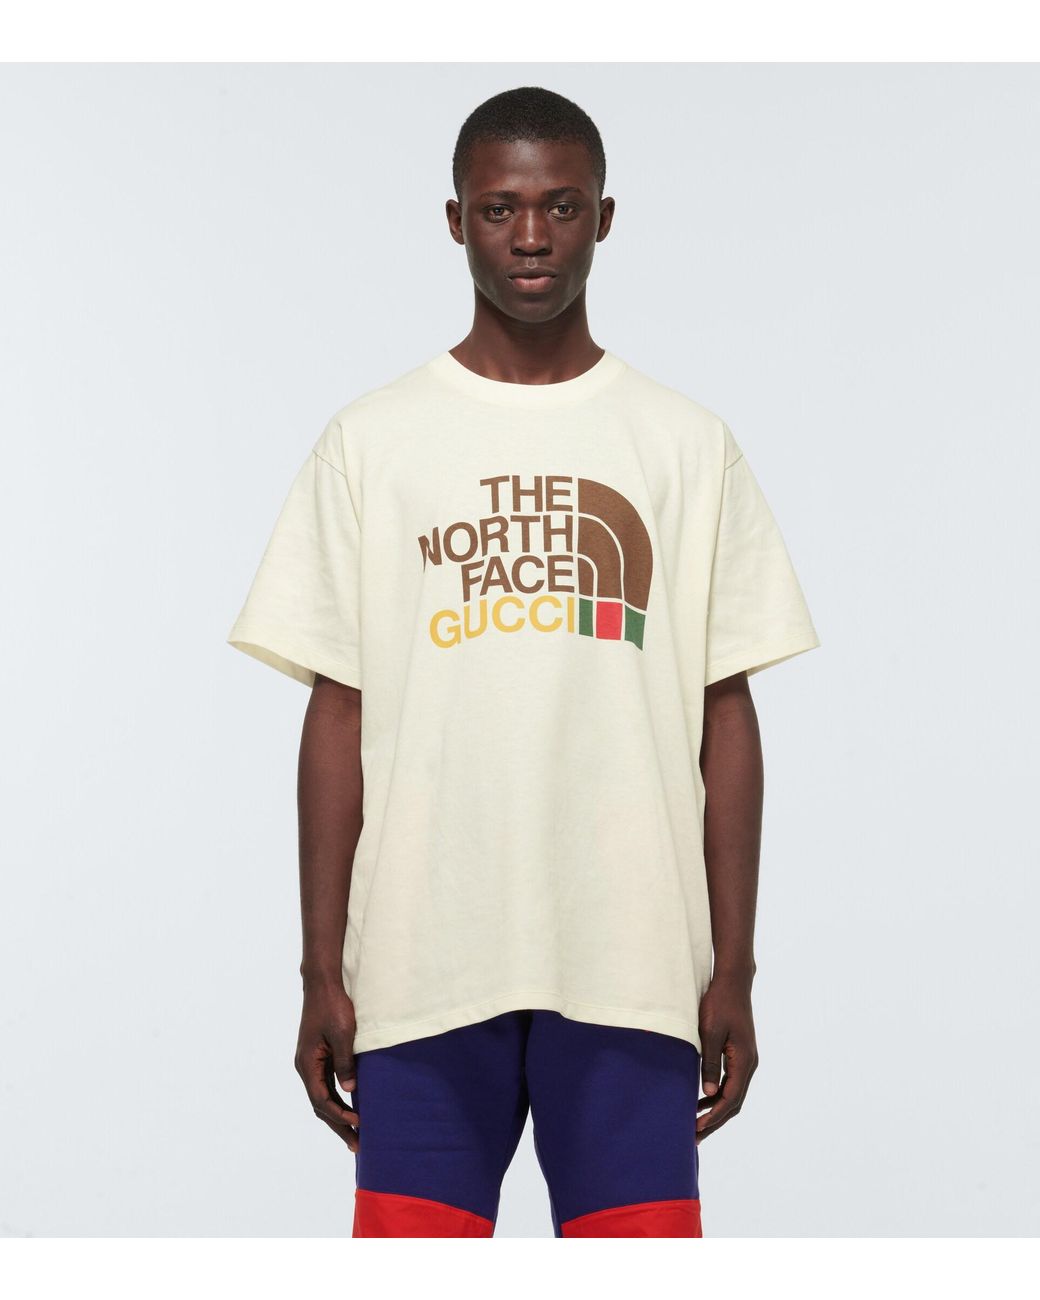 Gucci The North Face X Cotton T-shirt in White for Men